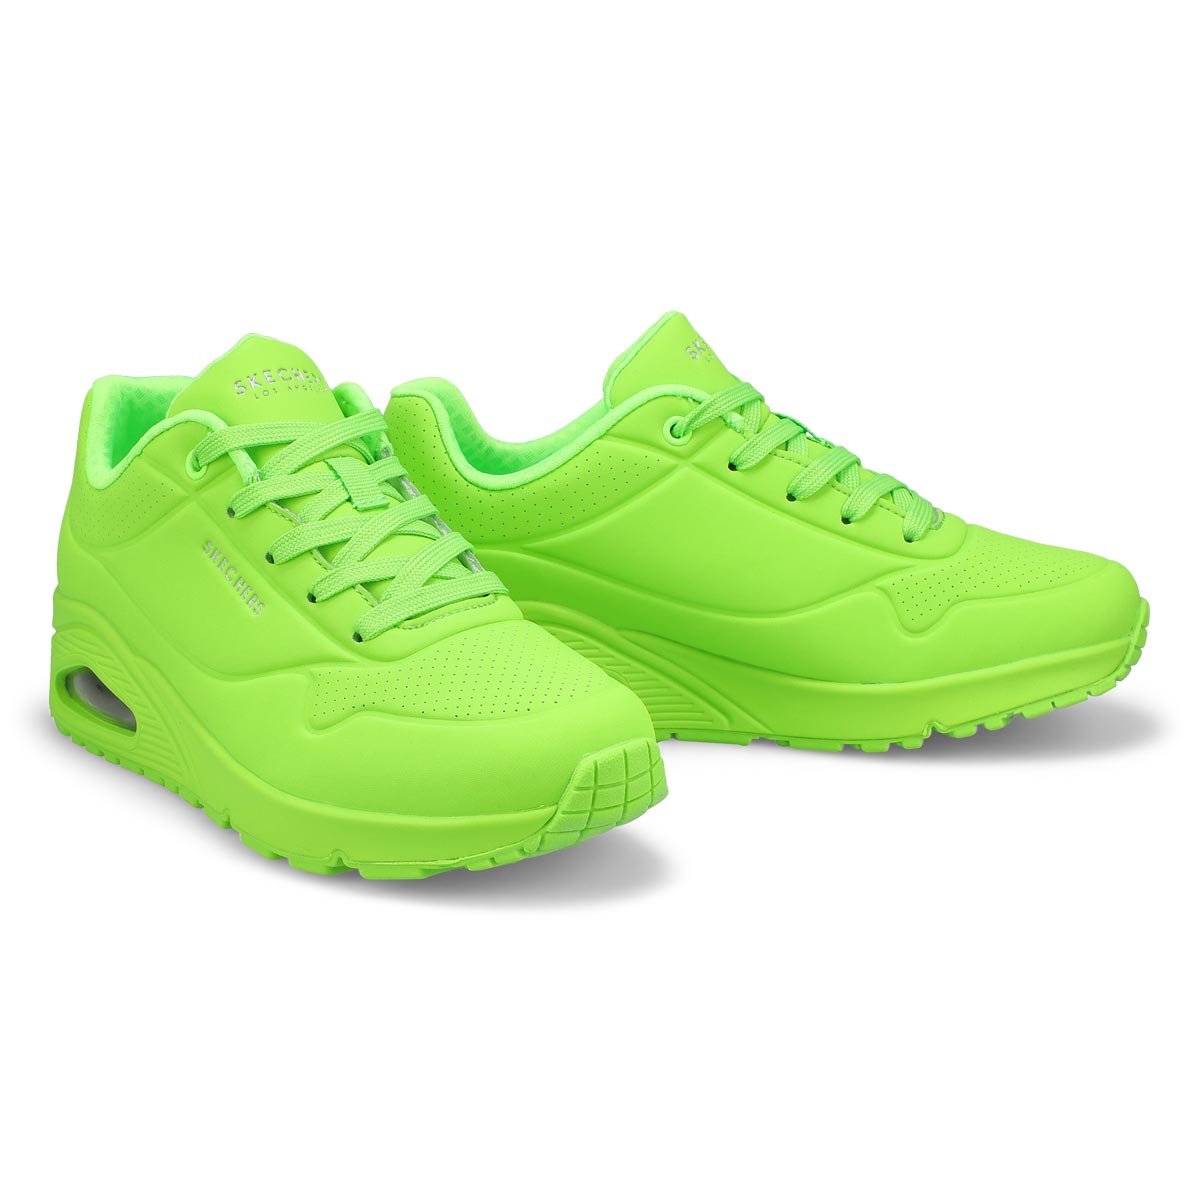 Women's Uno Night Shades Lace Up Sneaker - Lime Green